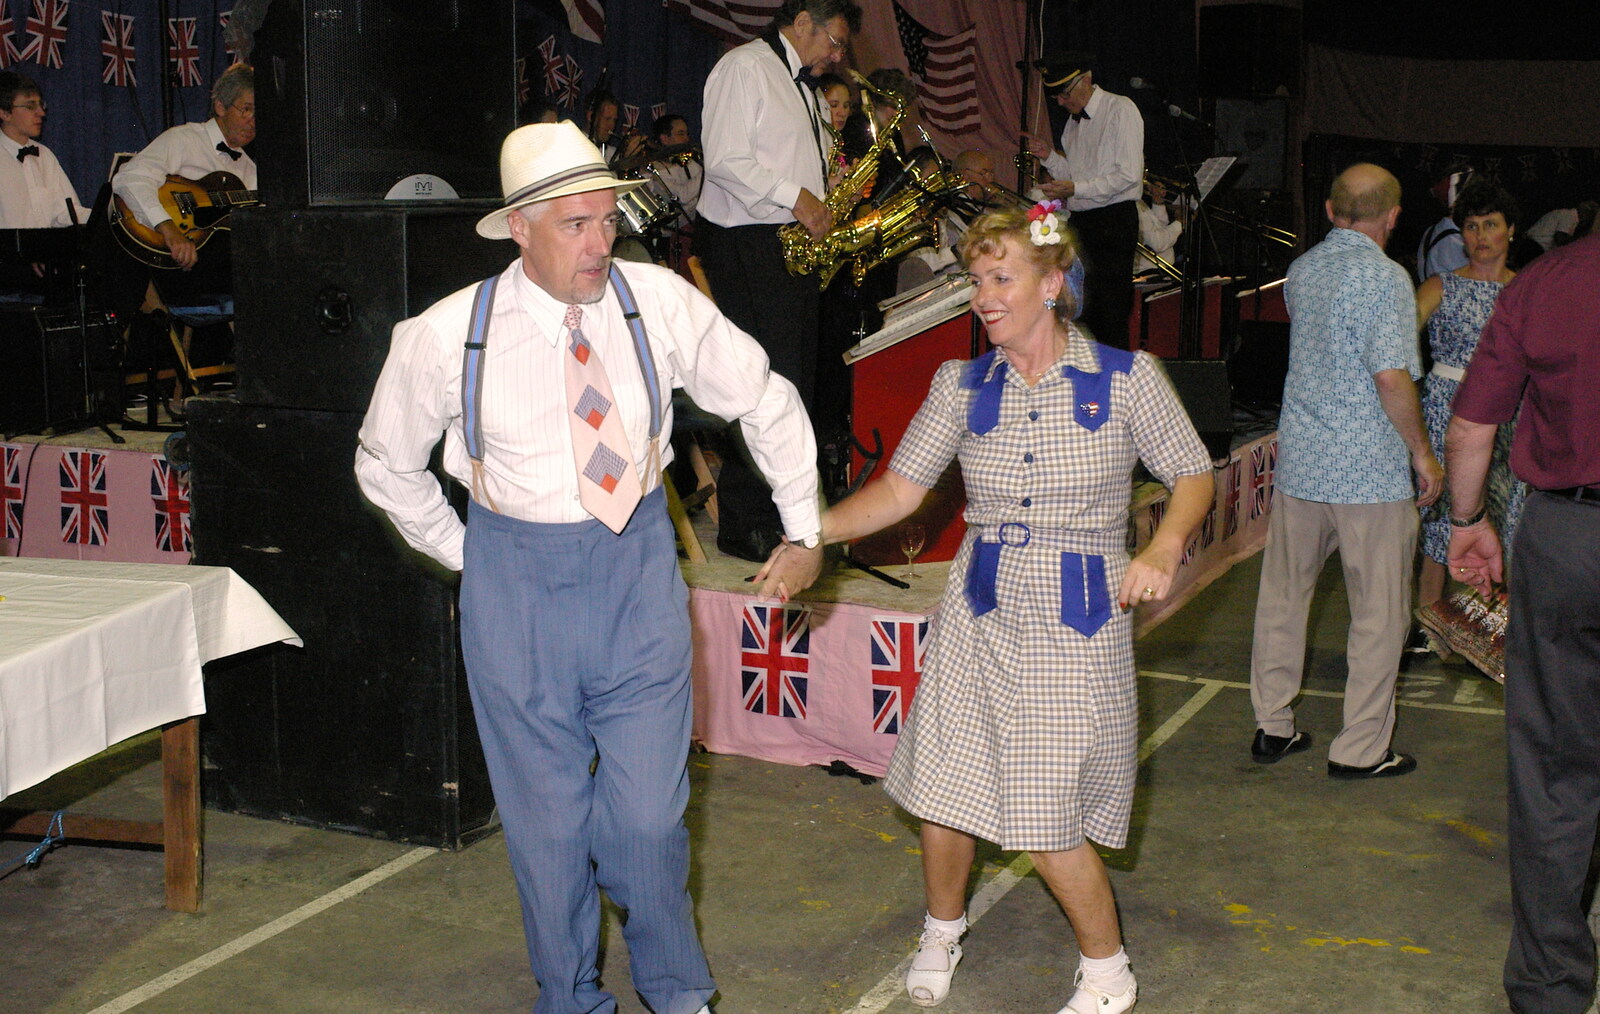 Some jiving from Another 1940s Dance, Ellough Airfield, Beccles, Suffolk - 24th June 2005